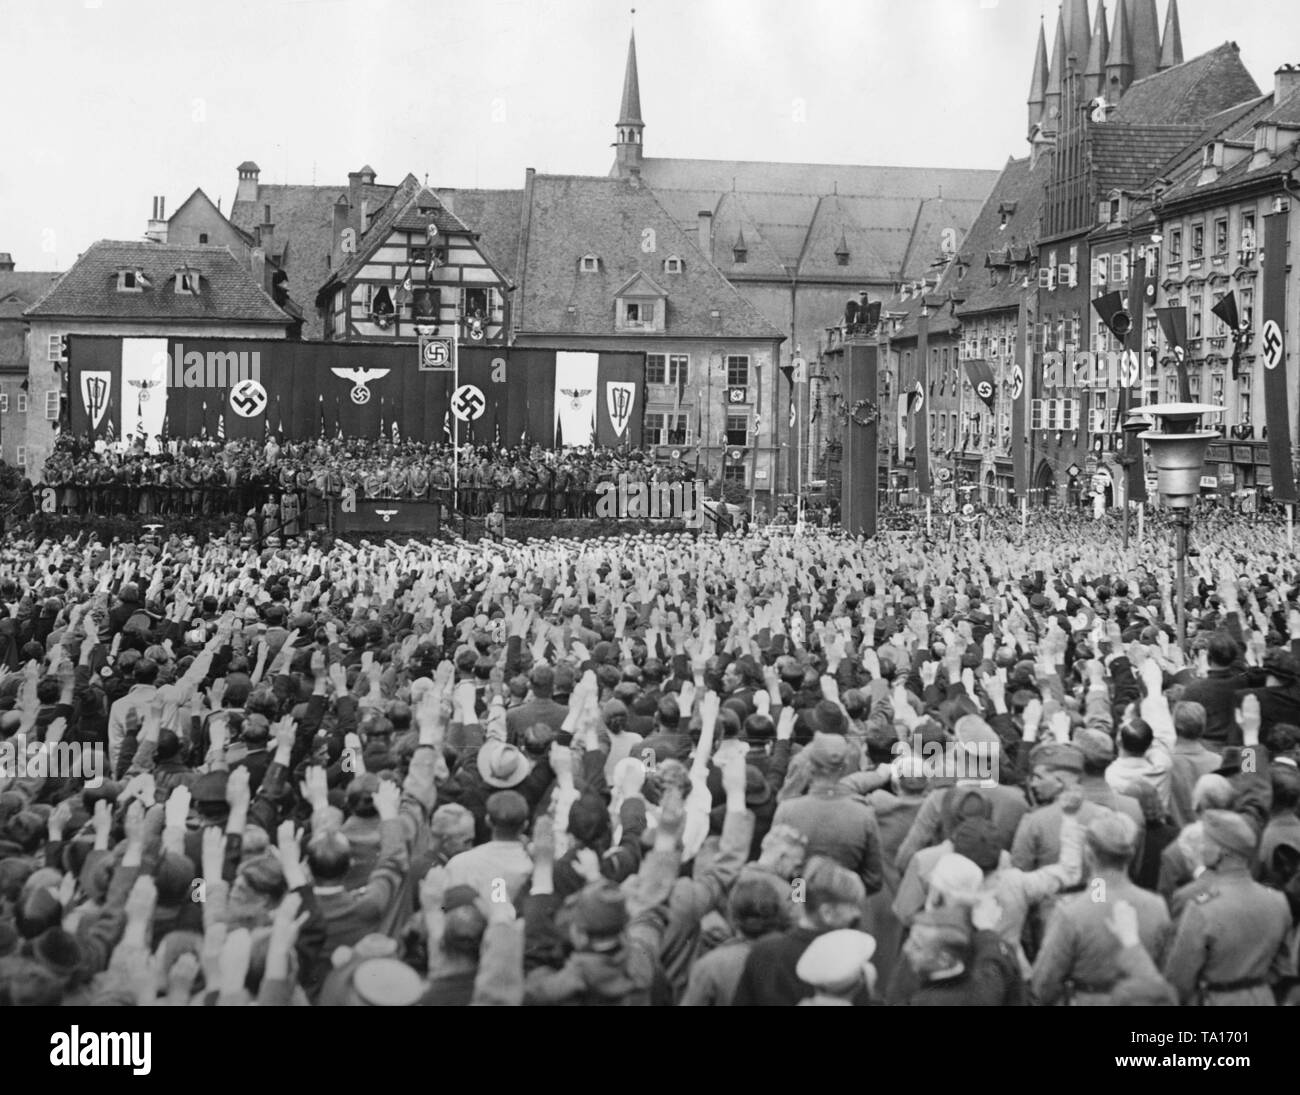 view-of-the-market-square-in-cheb-on-october-3-1938-while-hitler-is-giving-a-speech-during-the-occupation-of-the-sudetenland-hitler-stands-in-the-background-on-the-tribune-at-the-lectern-TA1701.jpg